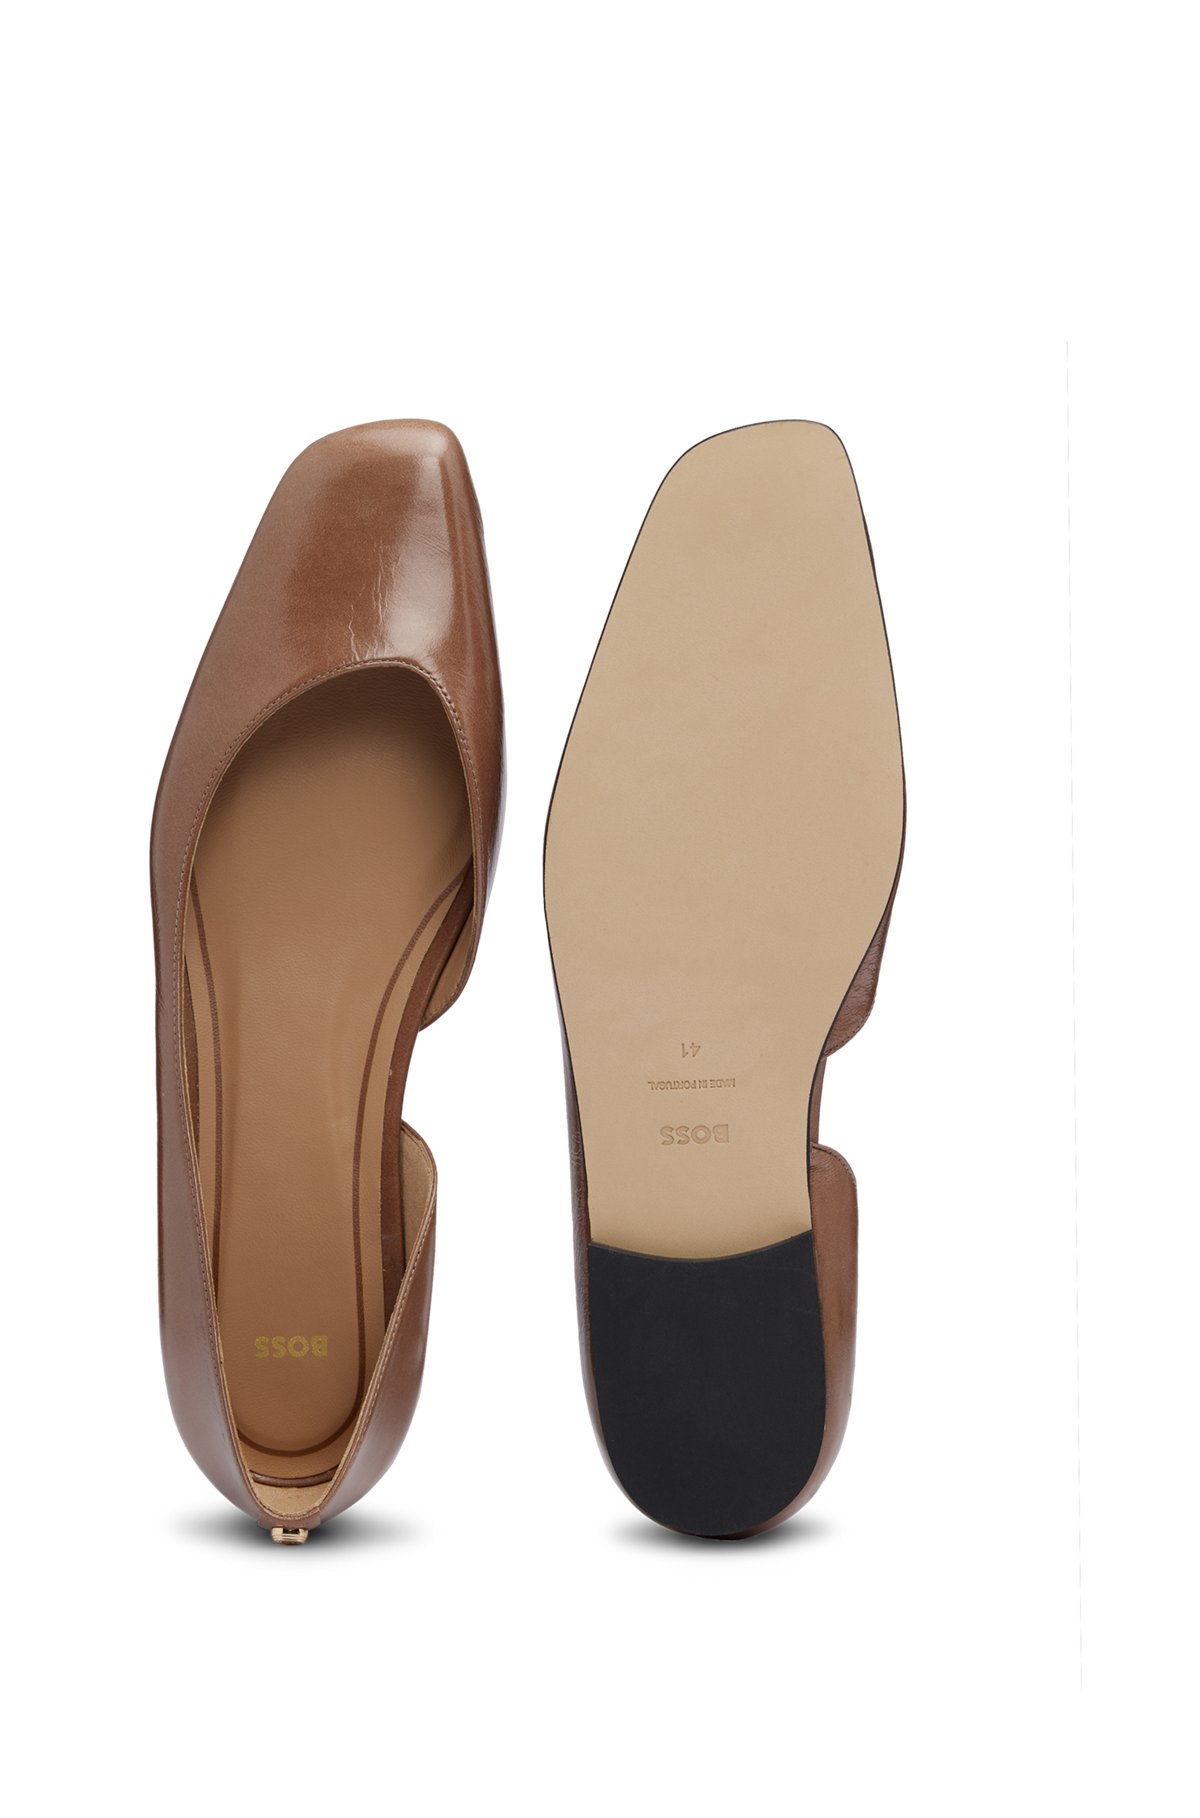 Ballerina flats in leather with asymmetric design, Brown